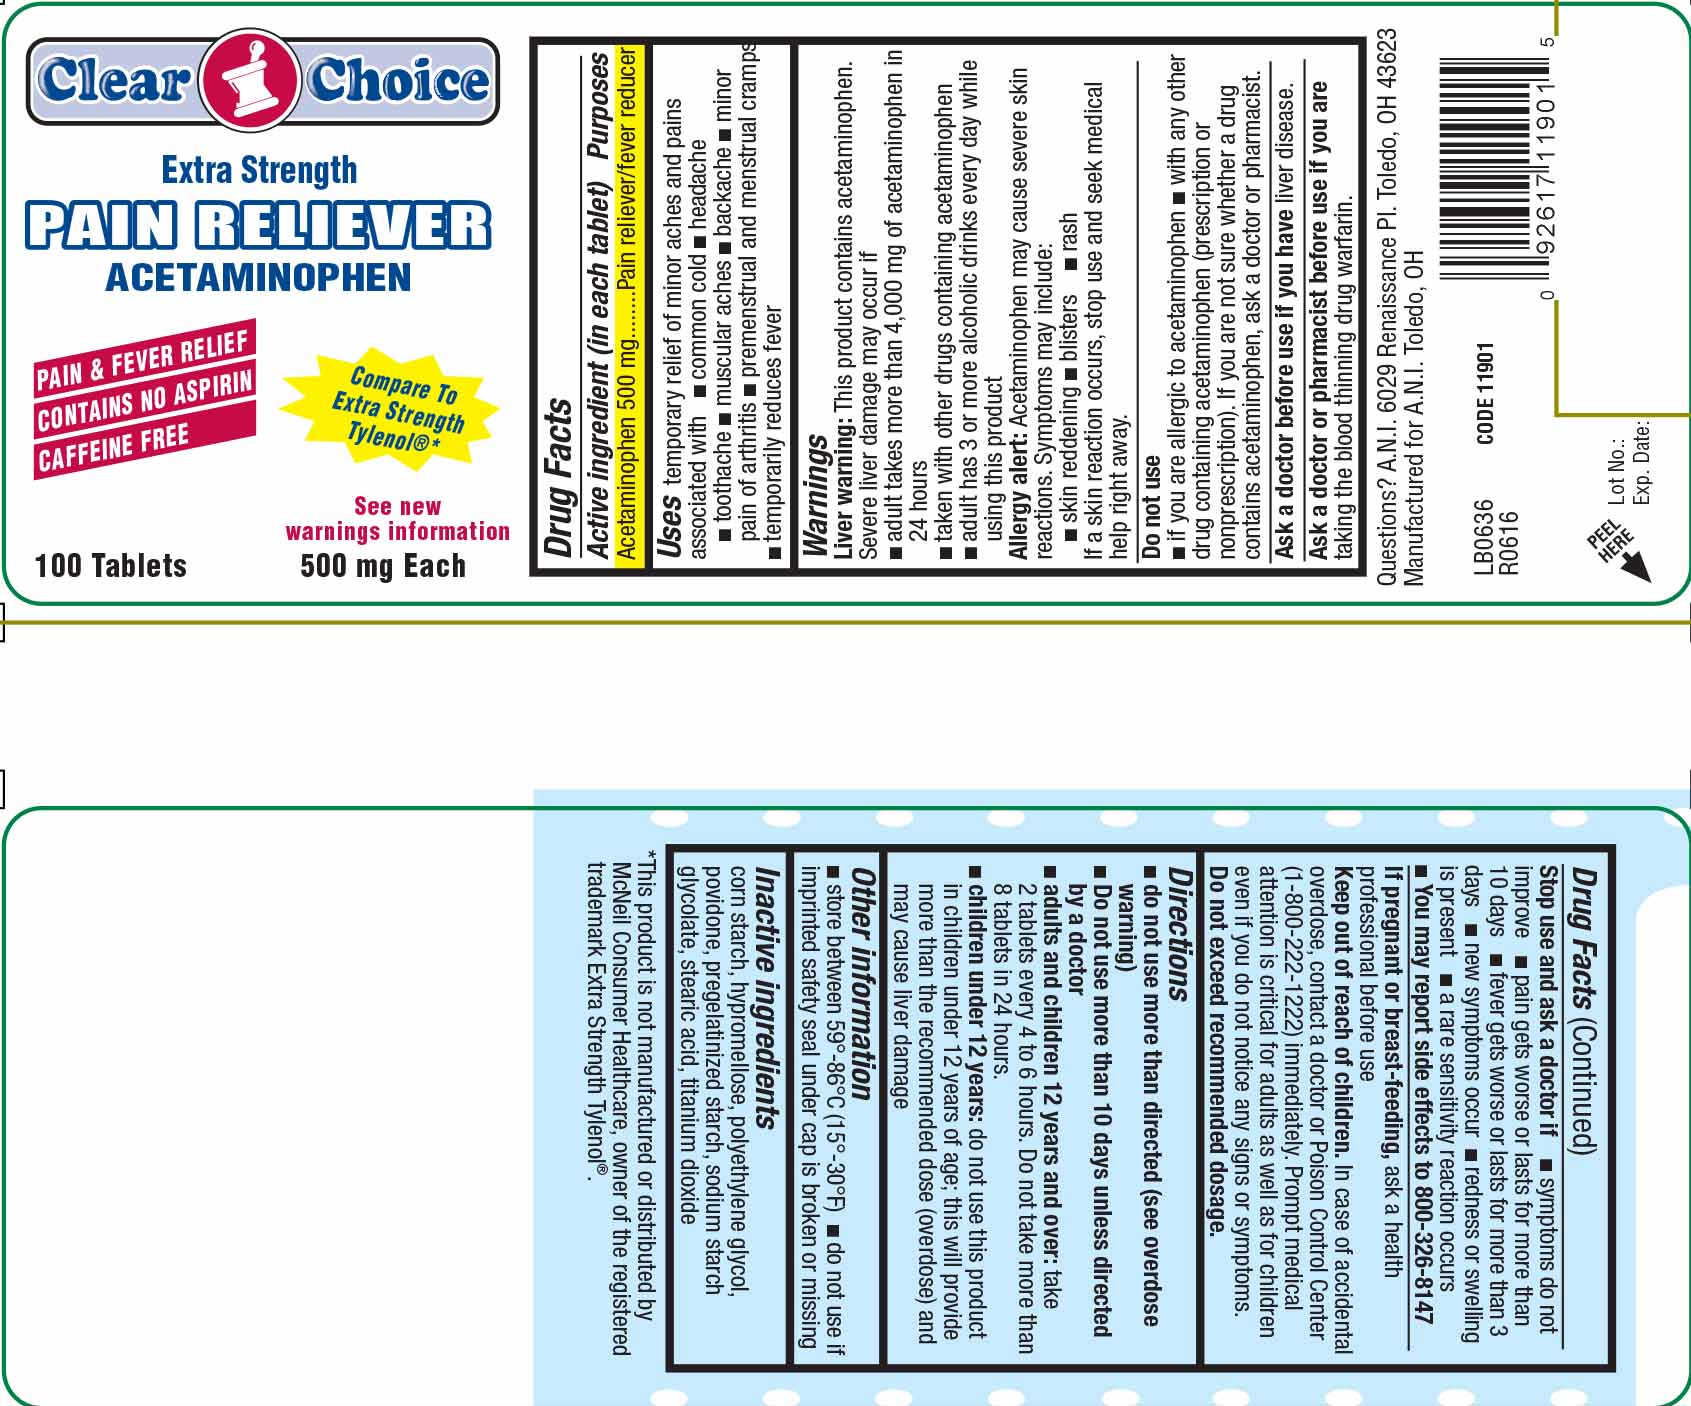 Clear Choice Extra Strength Pain Reliever | Acetaminophen Tablet Breastfeeding